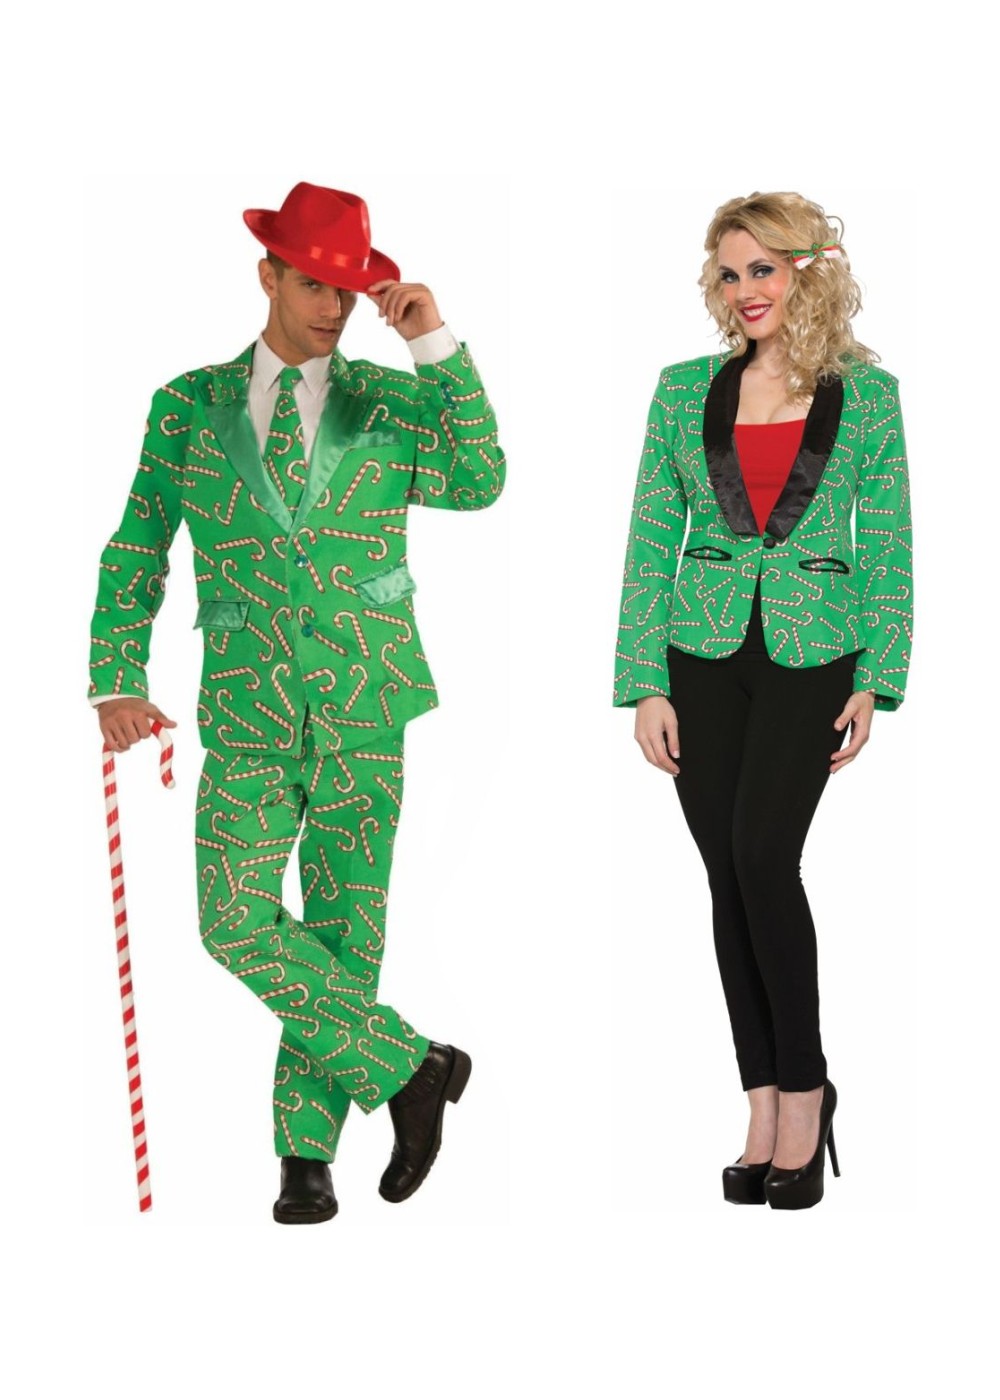 Candy Cane Men Costume And Candy Cane Blazer Women Couples Costumes